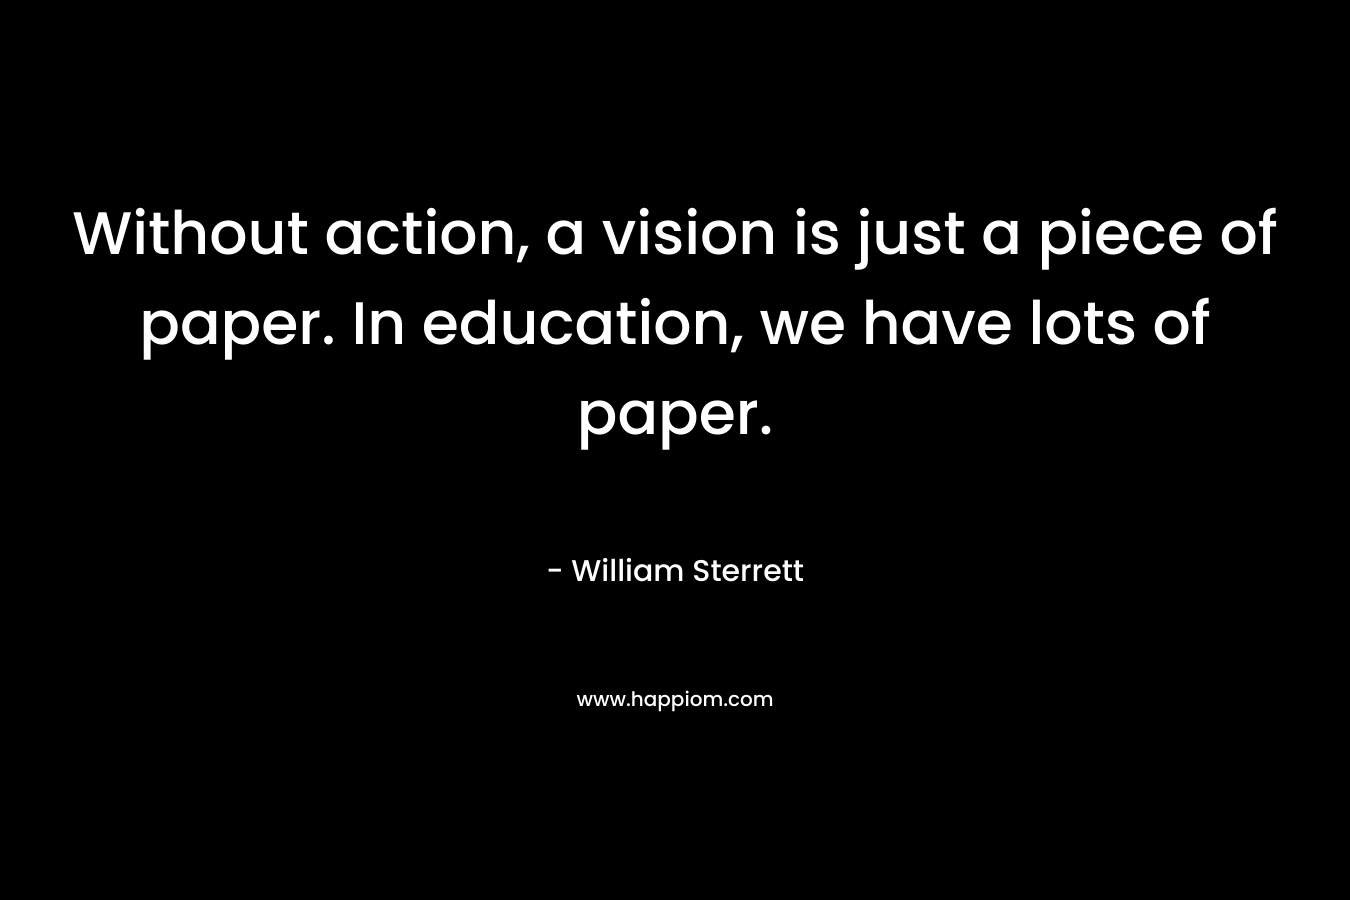 Without action, a vision is just a piece of paper. In education, we have lots of paper.